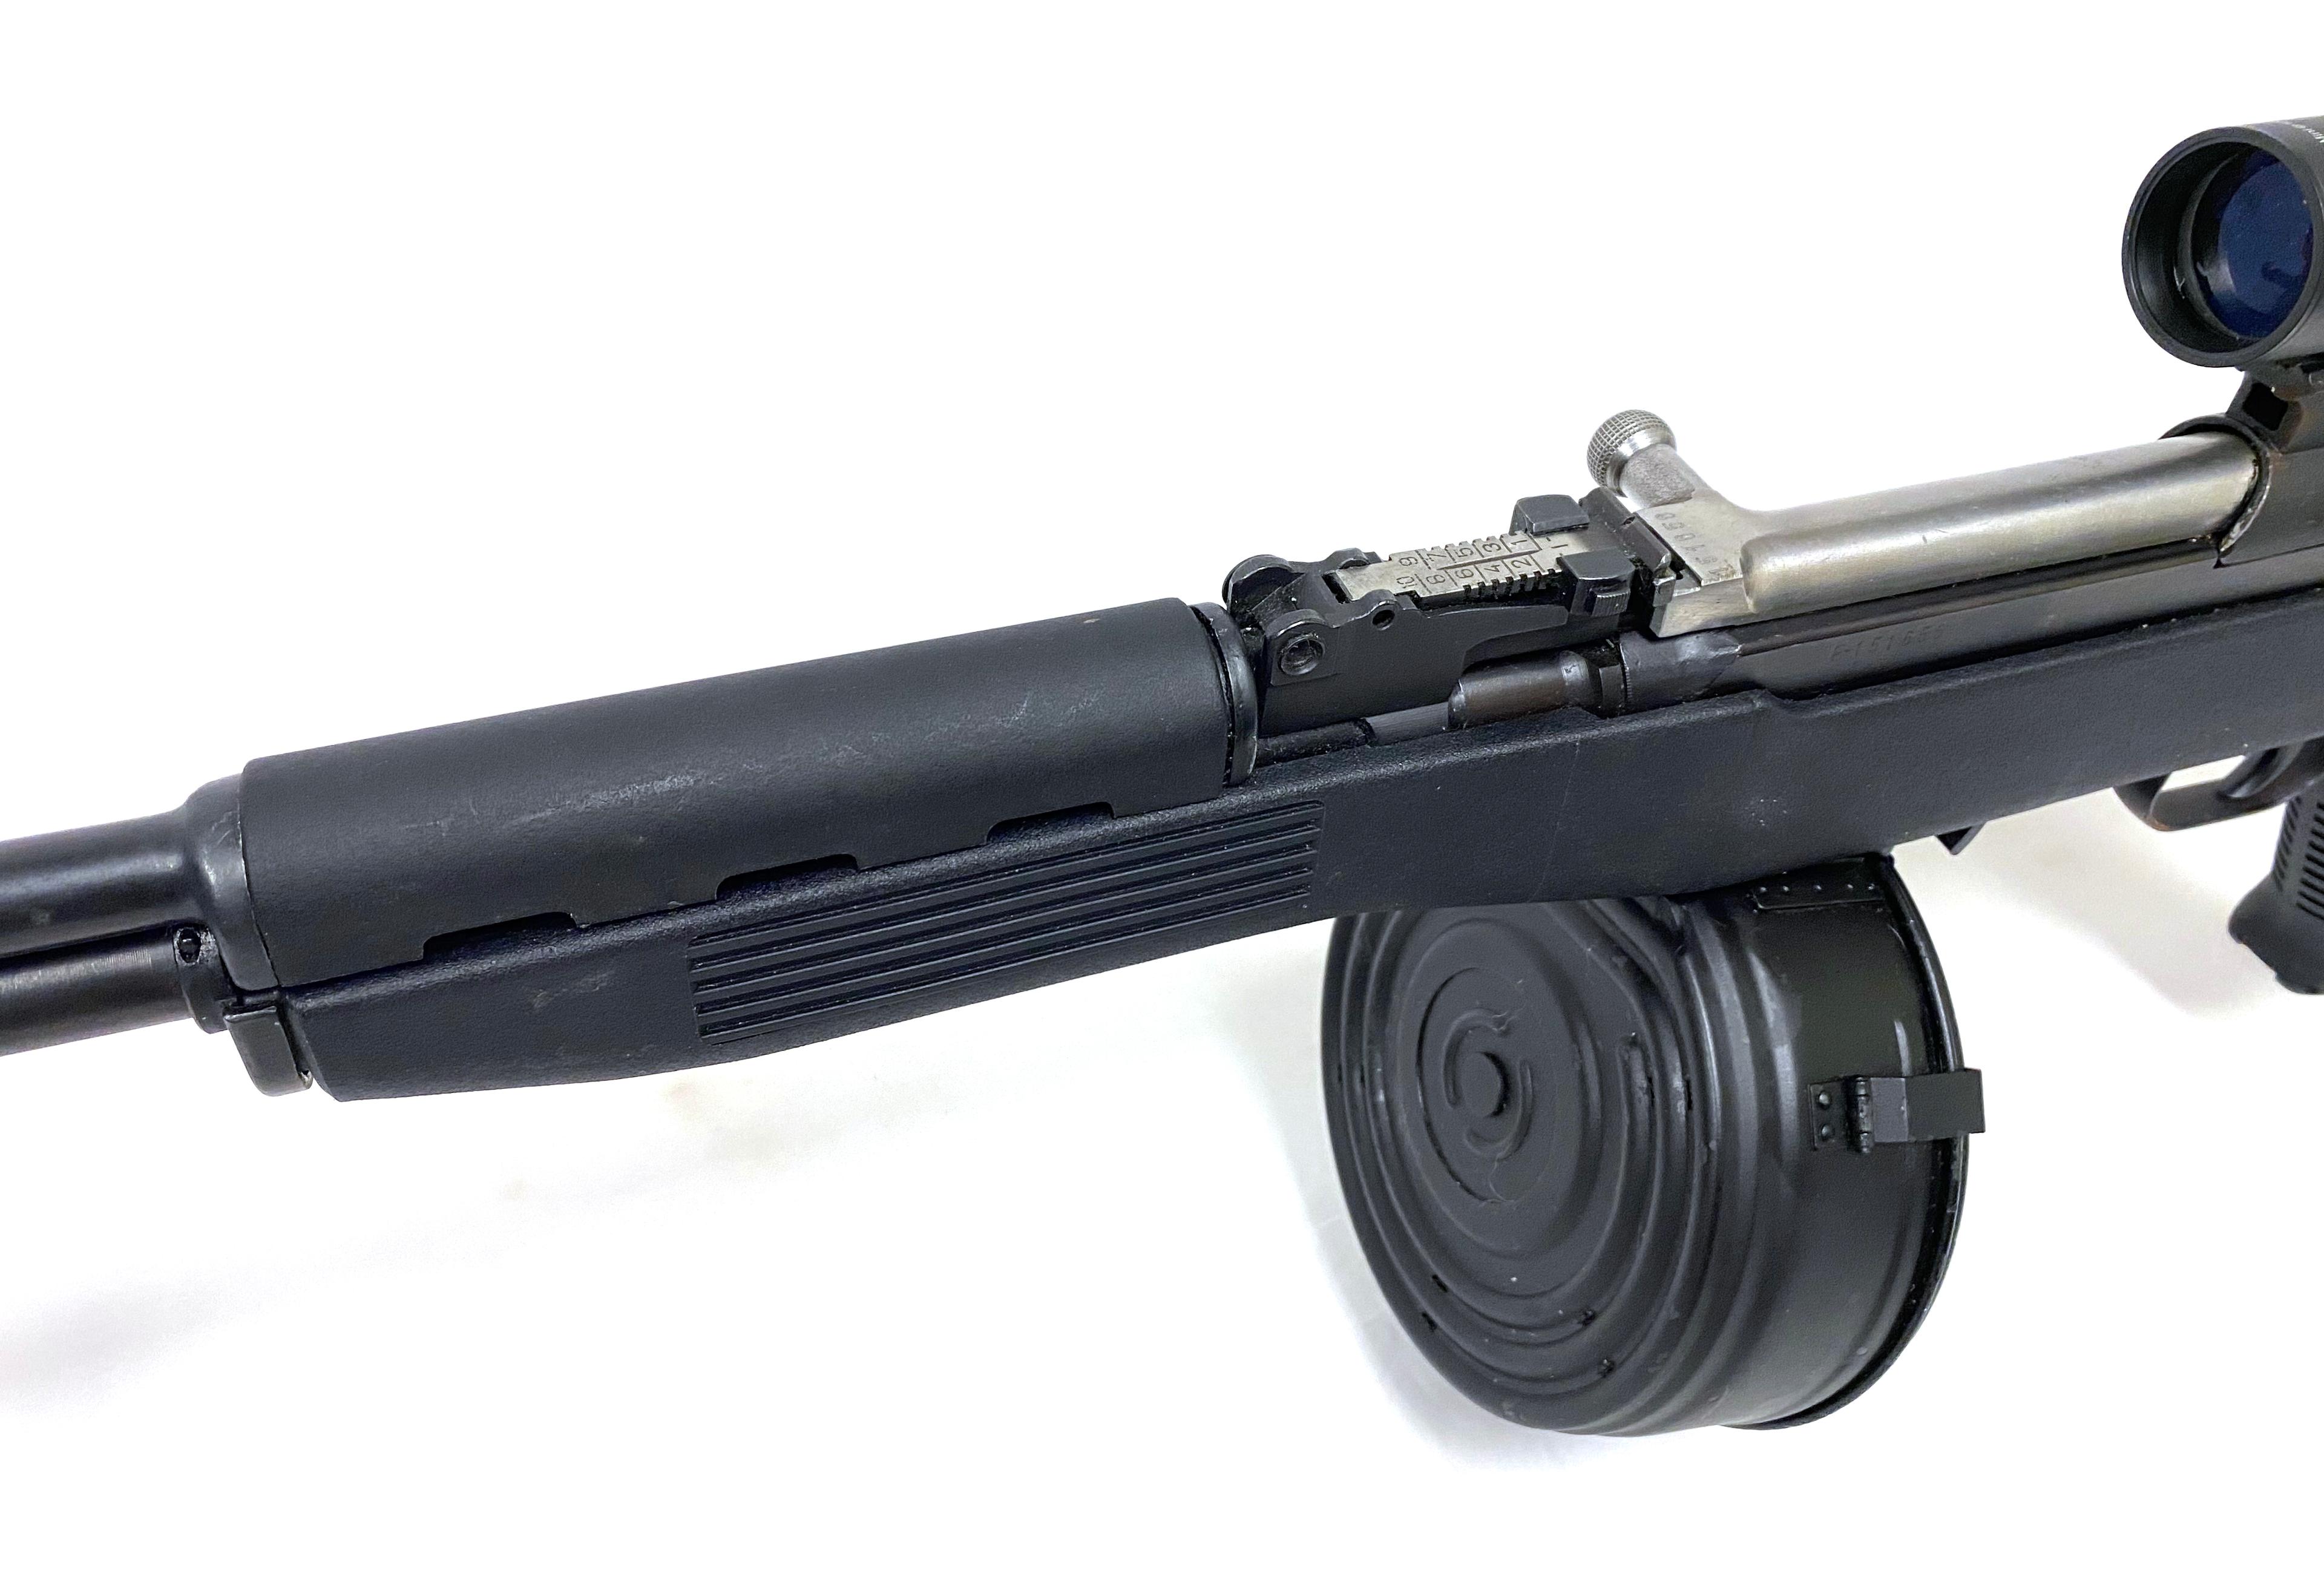 Excellent Yugo SKS 7.62x39 Semi-Automatic Rifle w/ Grenade Launcher & Extras,includes Matching Stock